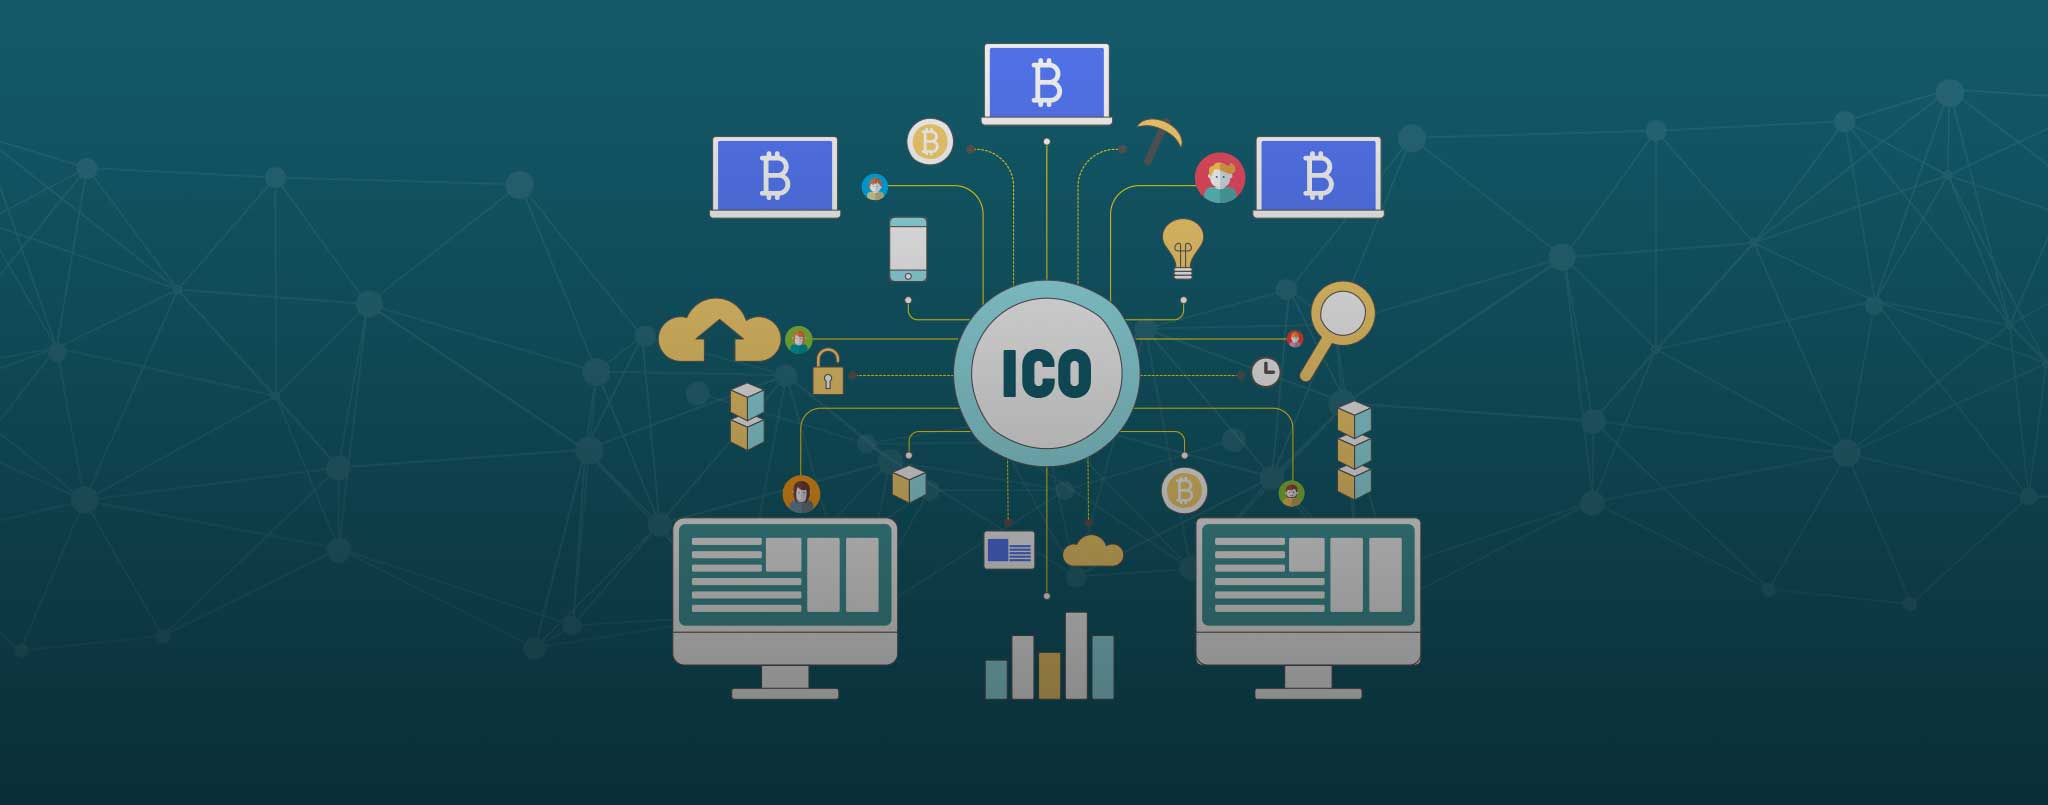 How Bounty Programs can help your ICO project - Accubits Blog